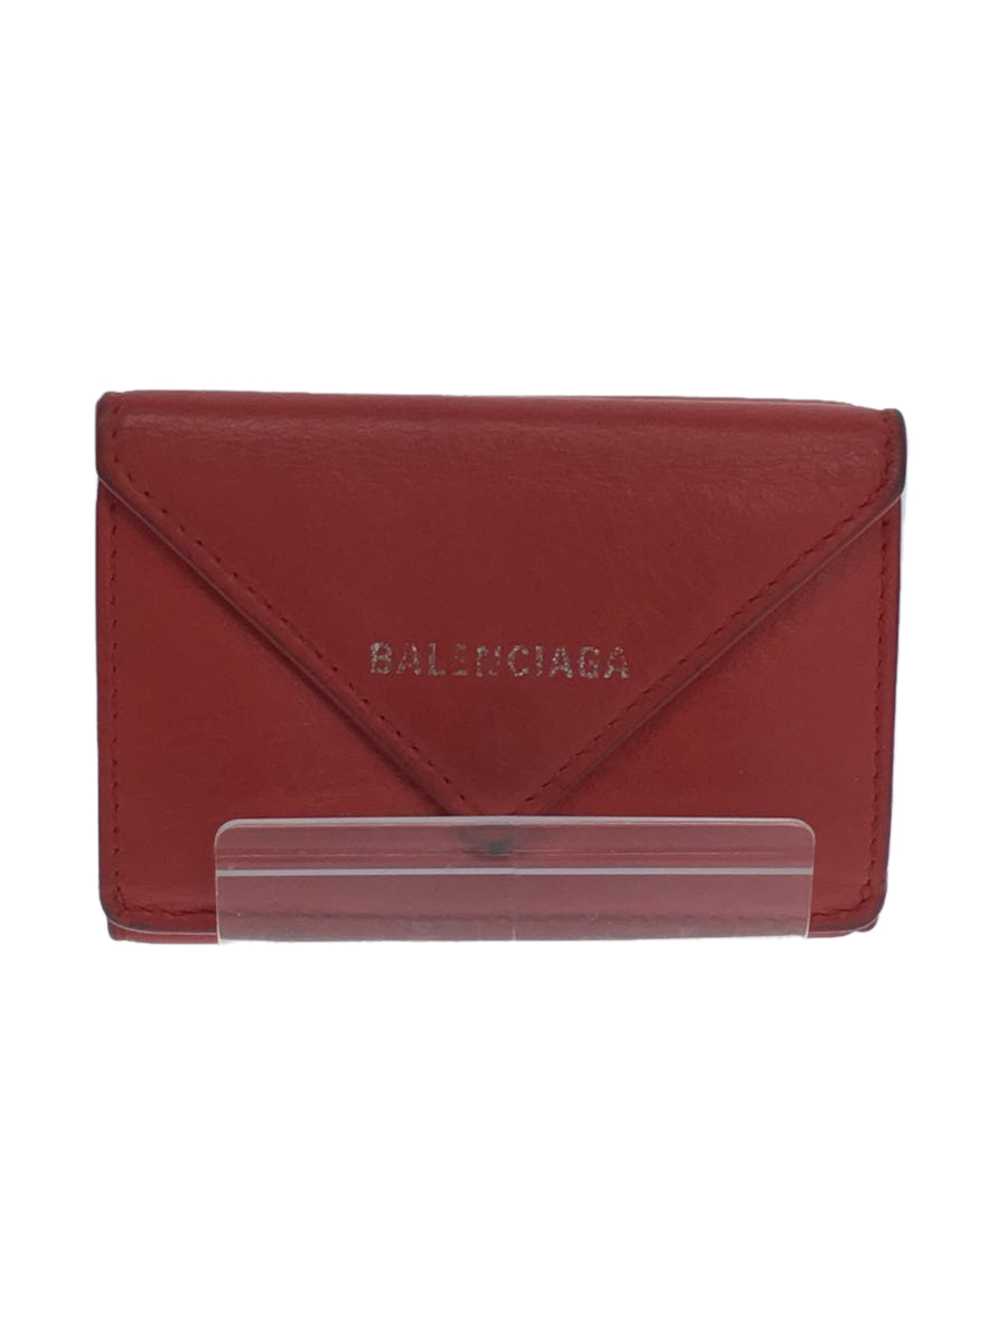 Balenciaga Trifold Wallet Leather Red Women - image 1